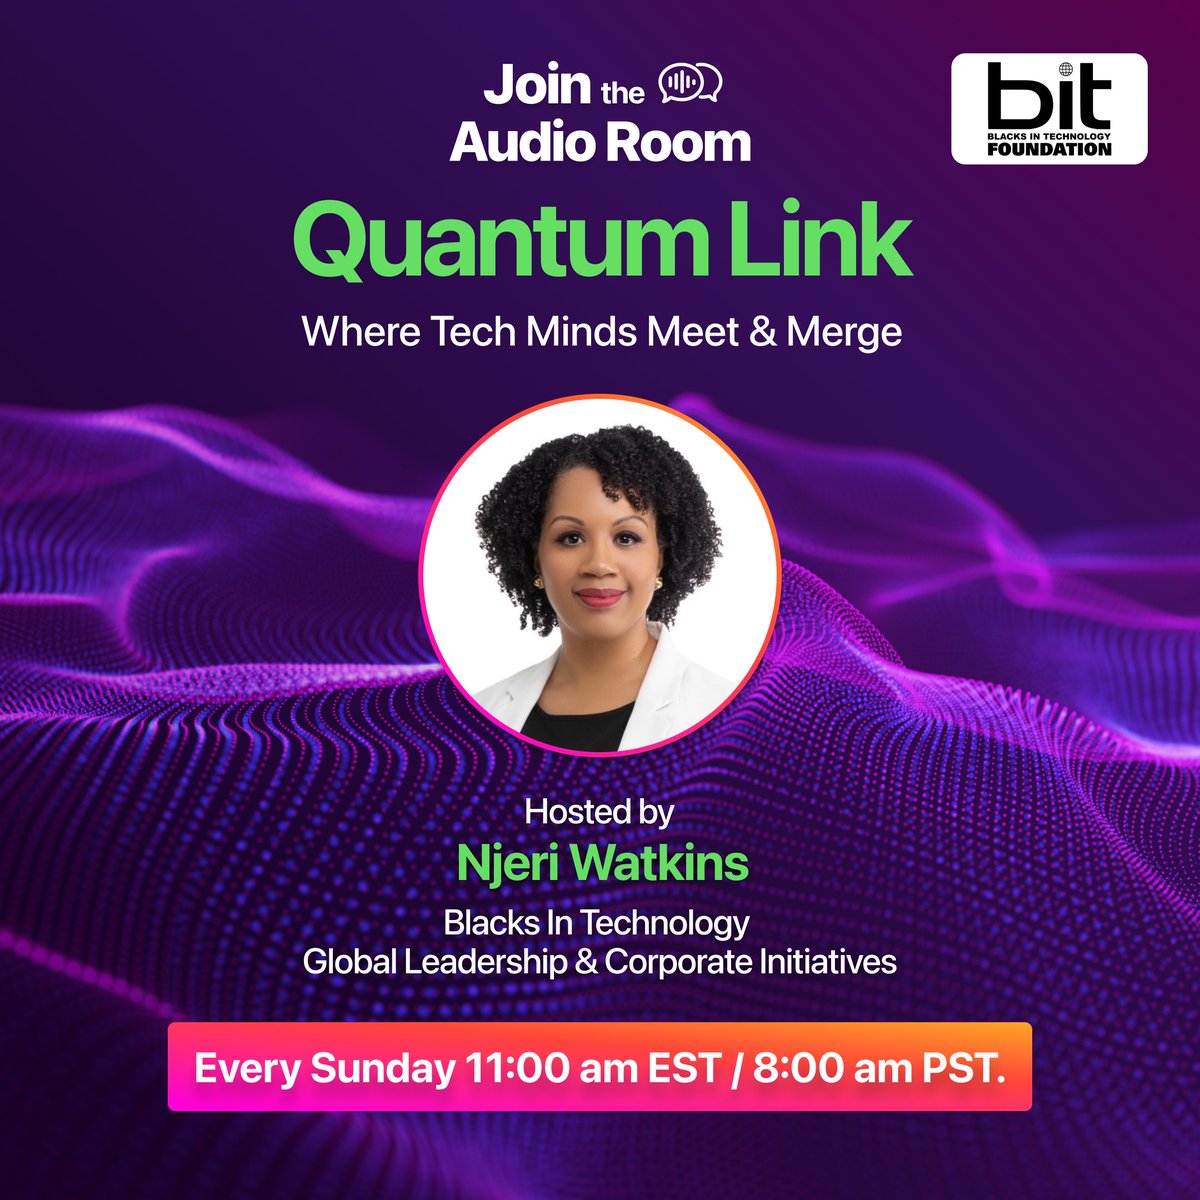 Ready to join the conversation with @blkintechnology? 💻 We couldn't be more excited to welcome @NjeriWatkins to the Fanbase community! In tomorrow's audio room she will share about her role with Blacks in Technology and allow a space for tech minds to merge! #fanbase #tech